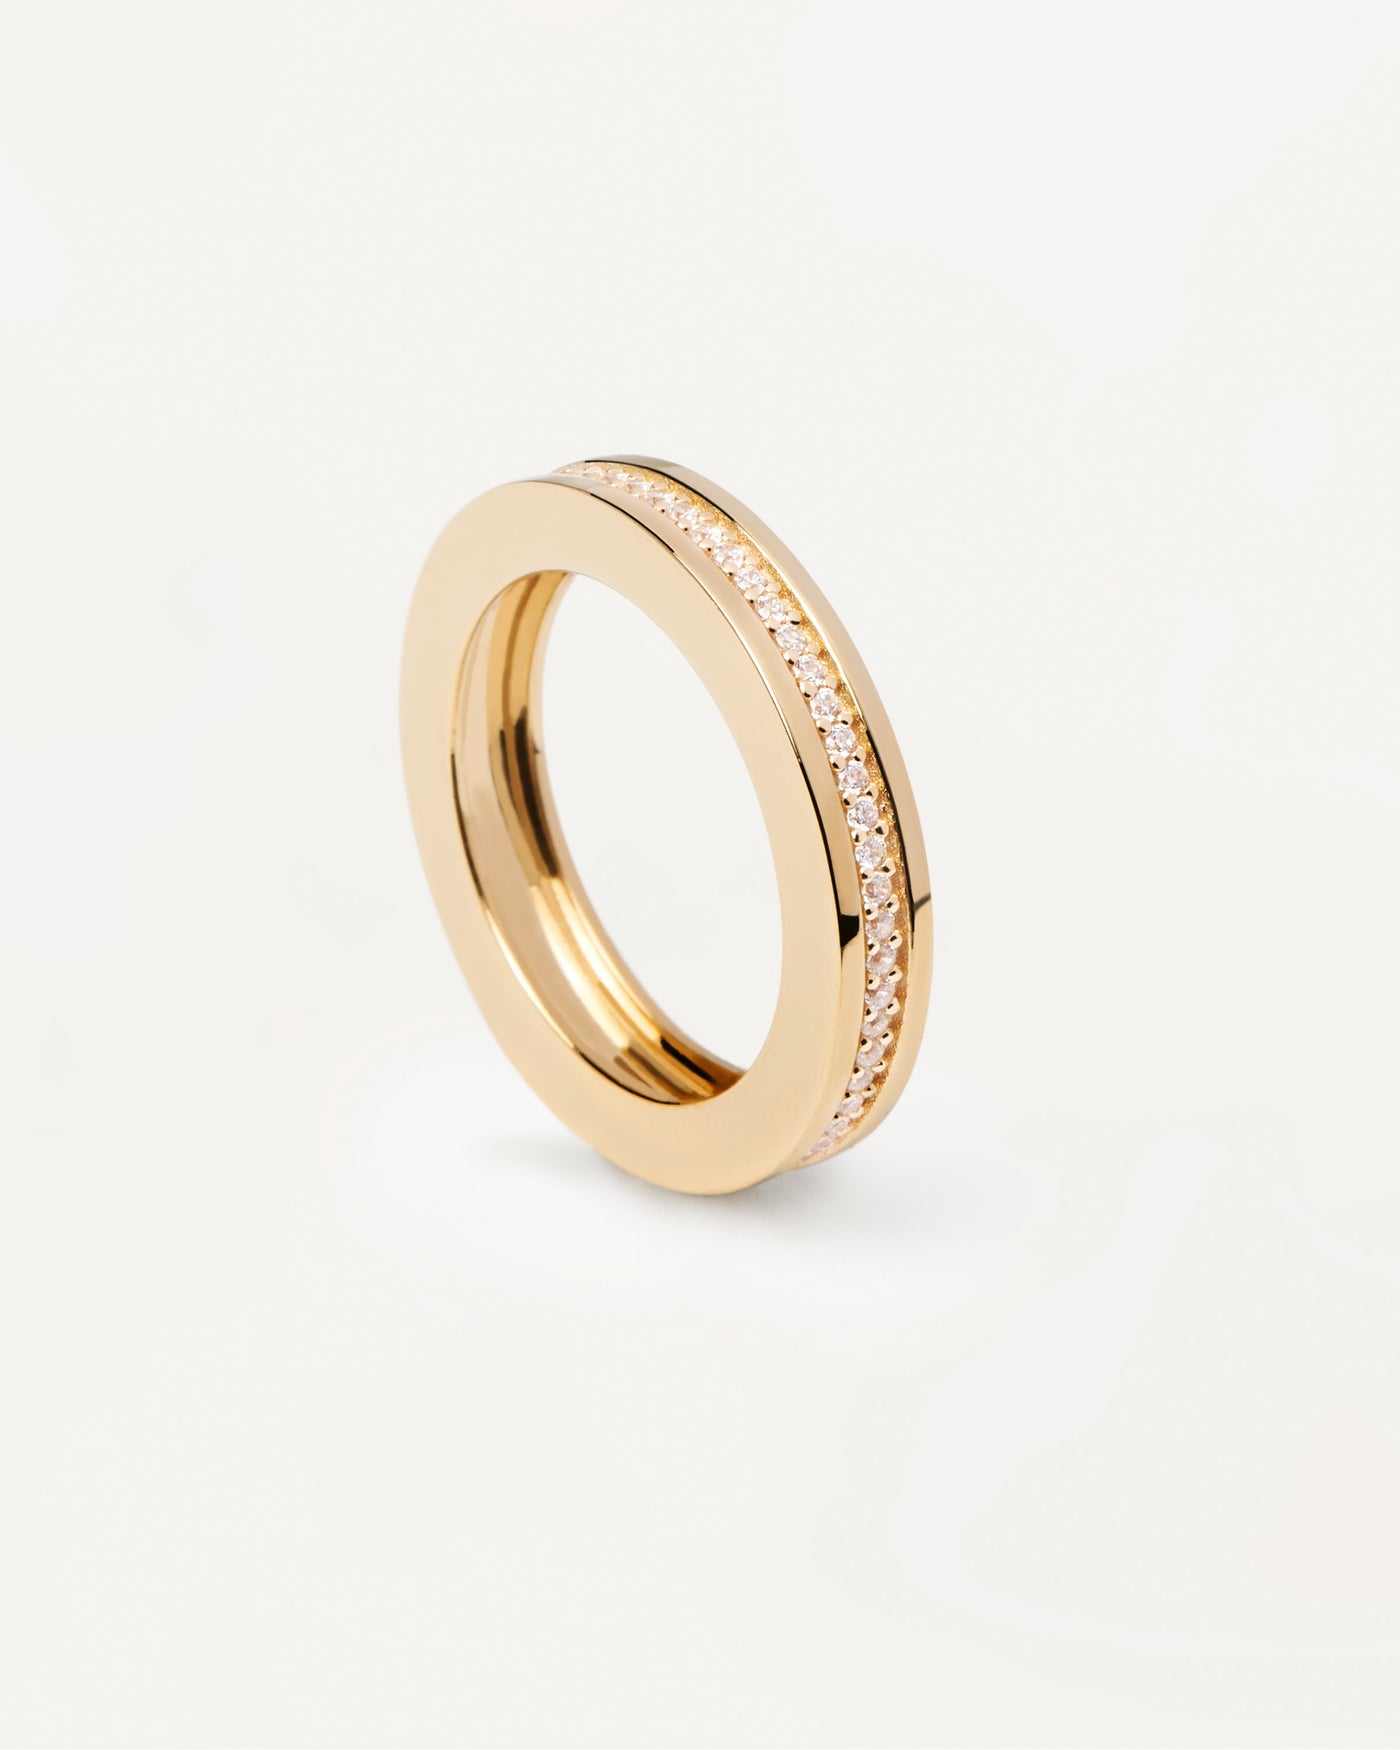 2023 Selection | Infinity Ring. Gold-plated eternity ring in disc shape. Get the latest arrival from PDPAOLA. Place your order safely and get this Best Seller. Free Shipping.